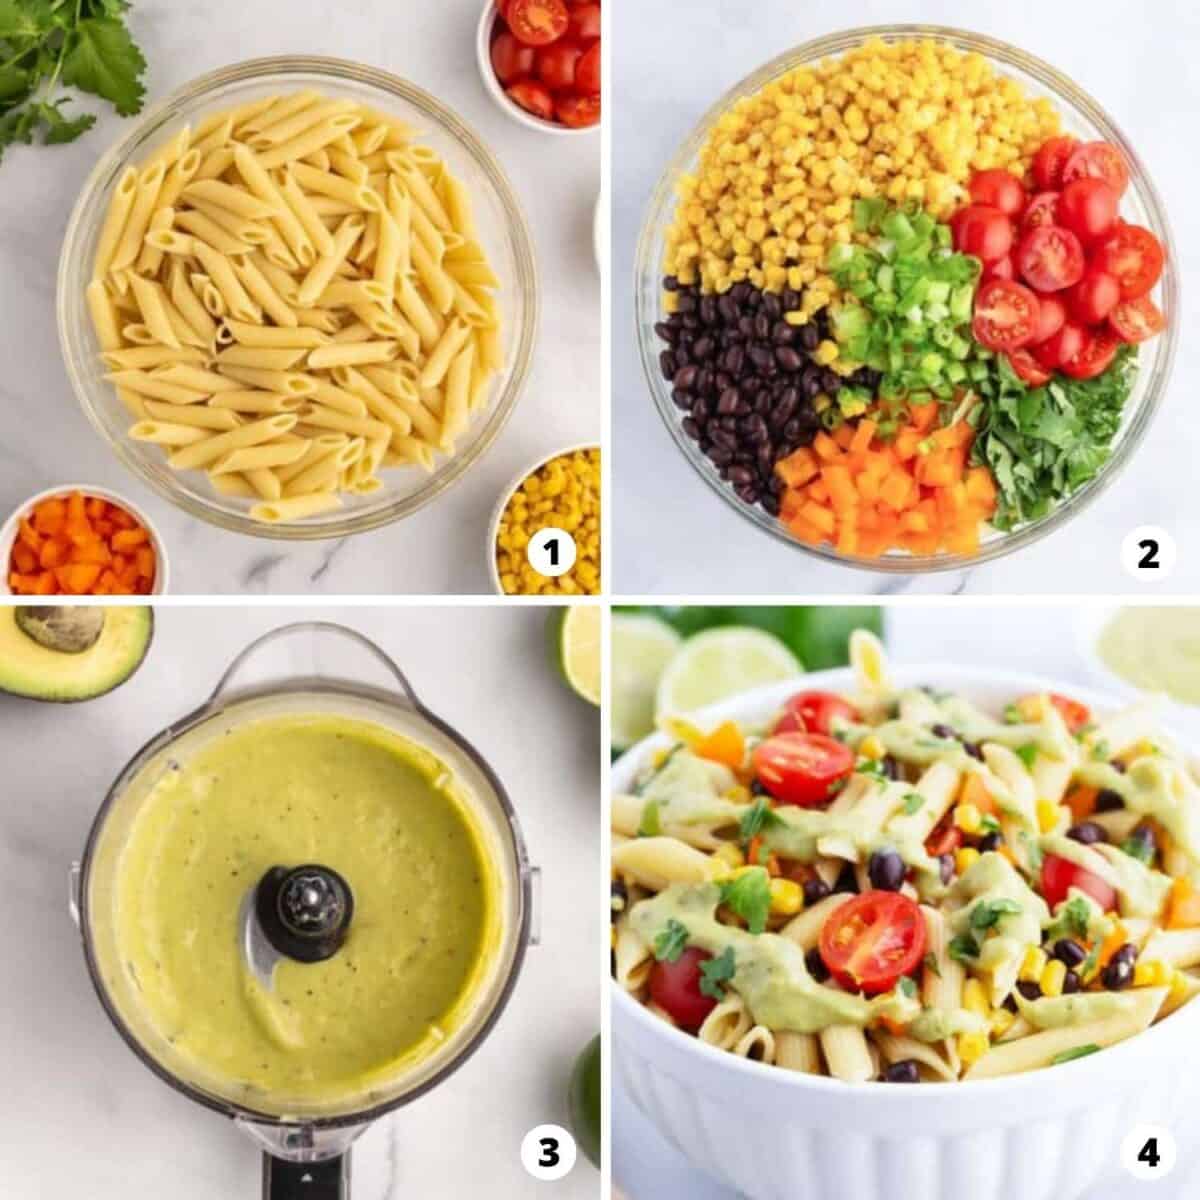 The process of making southwest pasta salad in a four step photo collage.